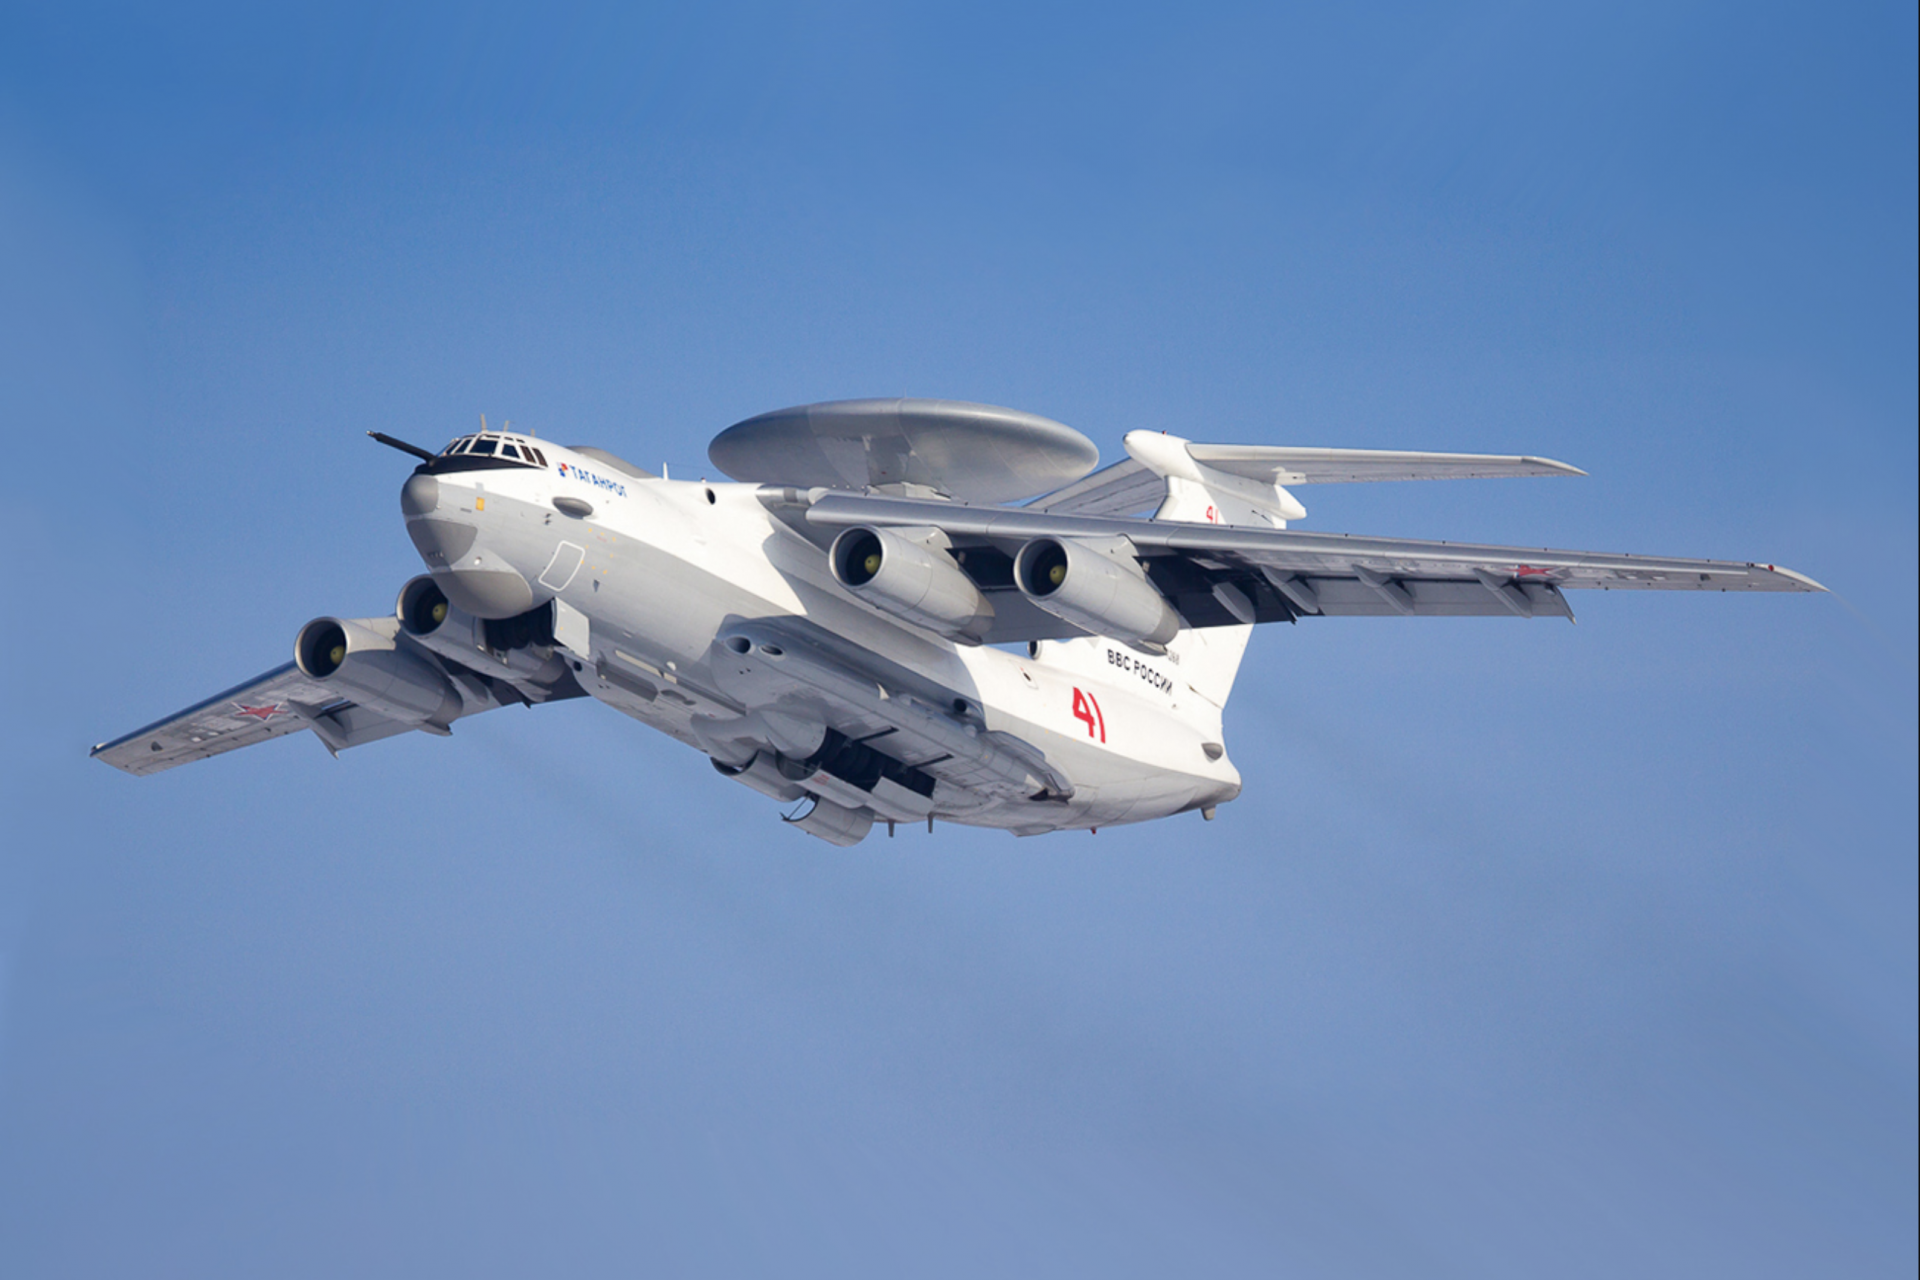 The Beriev A-50 was knocked out by the partisans 